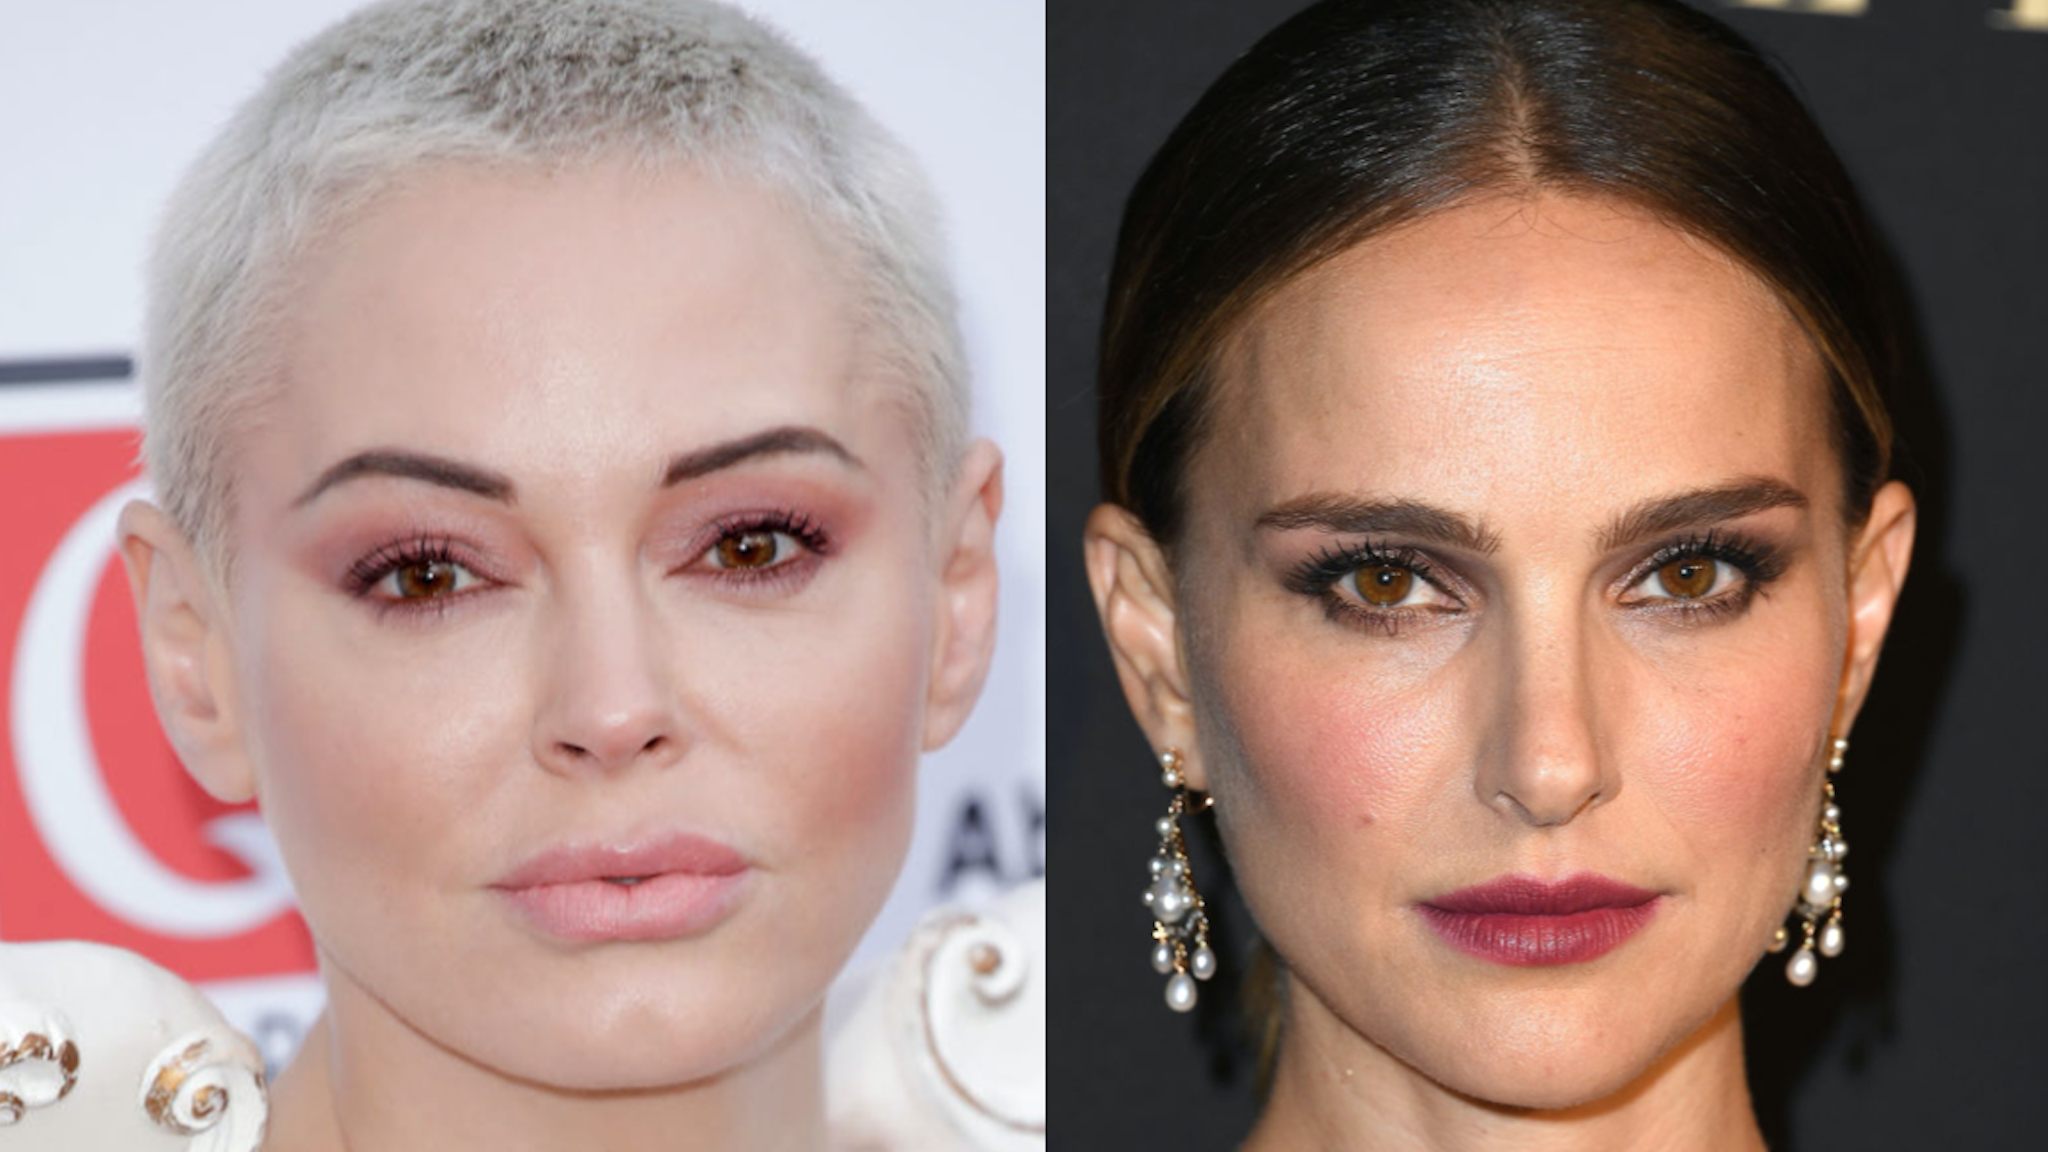 Rose McGowan attends the Q Awards 2019 at The Roundhouse on October 16, 2019 in London, England.//Natalie Portman arrives at the 2019 ELLE Women In Hollywood at the Beverly Wilshire Four Seasons Hotel on October 14, 2019 in Beverly Hills, California.